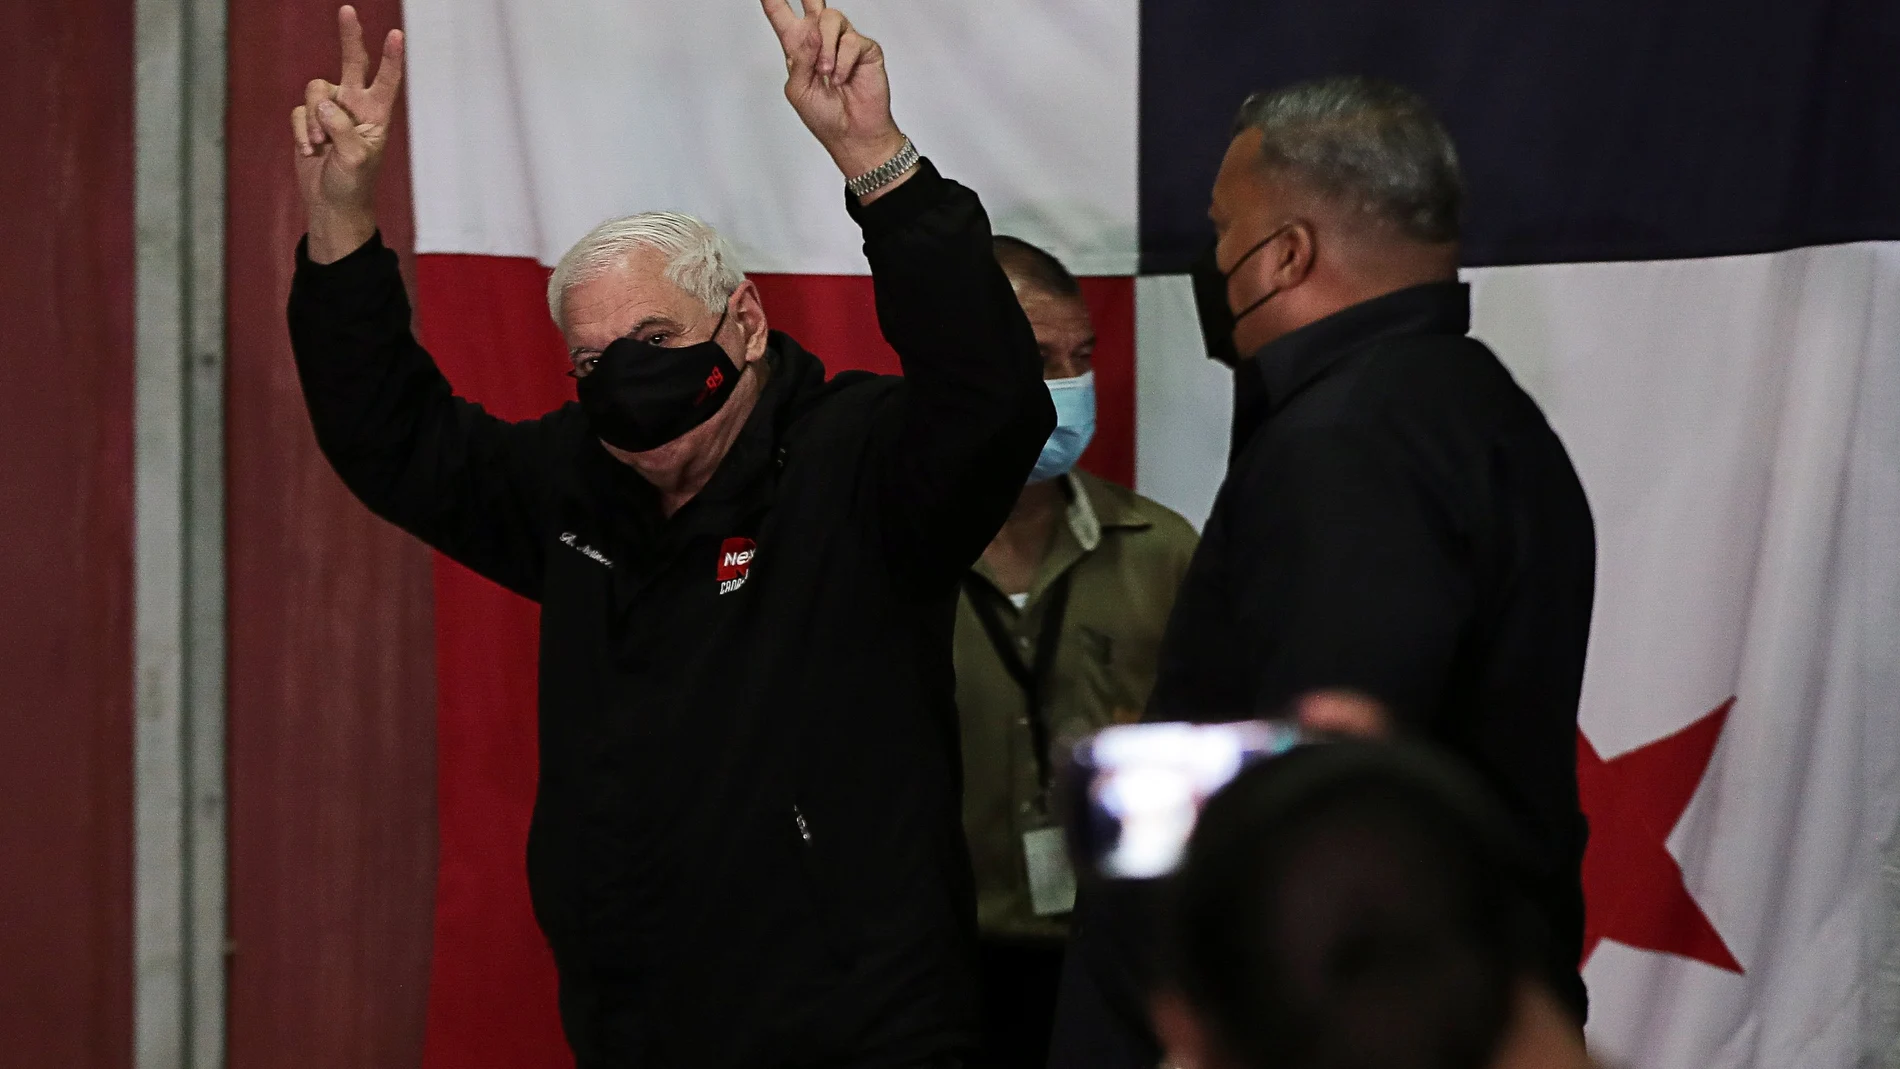 Former Panamanian president Ricardo Martinelli gestures while arriving to a courthouse where he was acquitted on tapping charges in Panama City, Panama November 9, 2021. REUTERS/Erick Marciscano